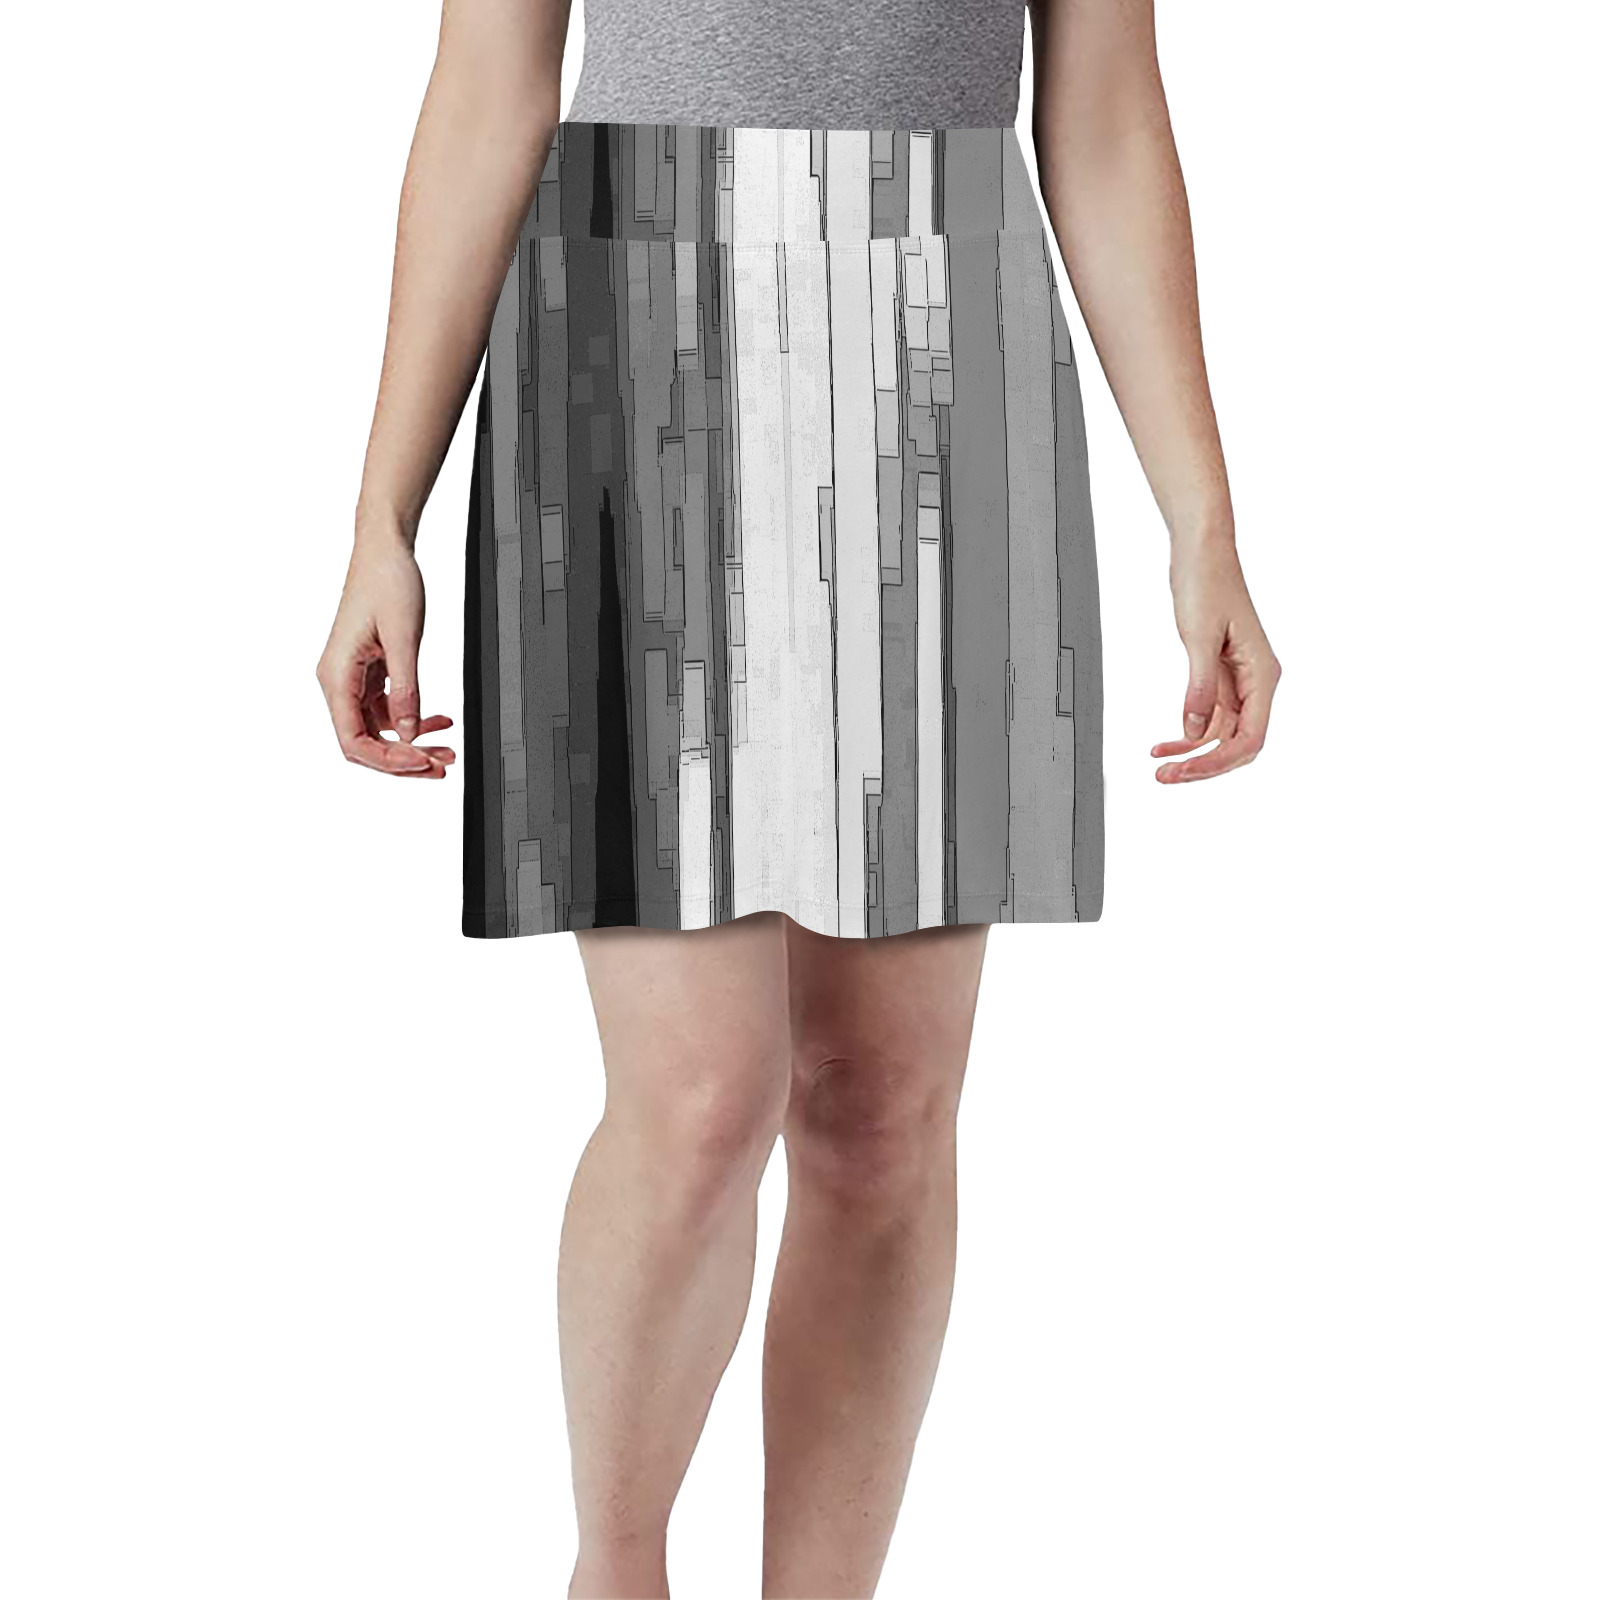 Greyscale Abstract B&W Art Women's Athletic Skirt (Model D64)